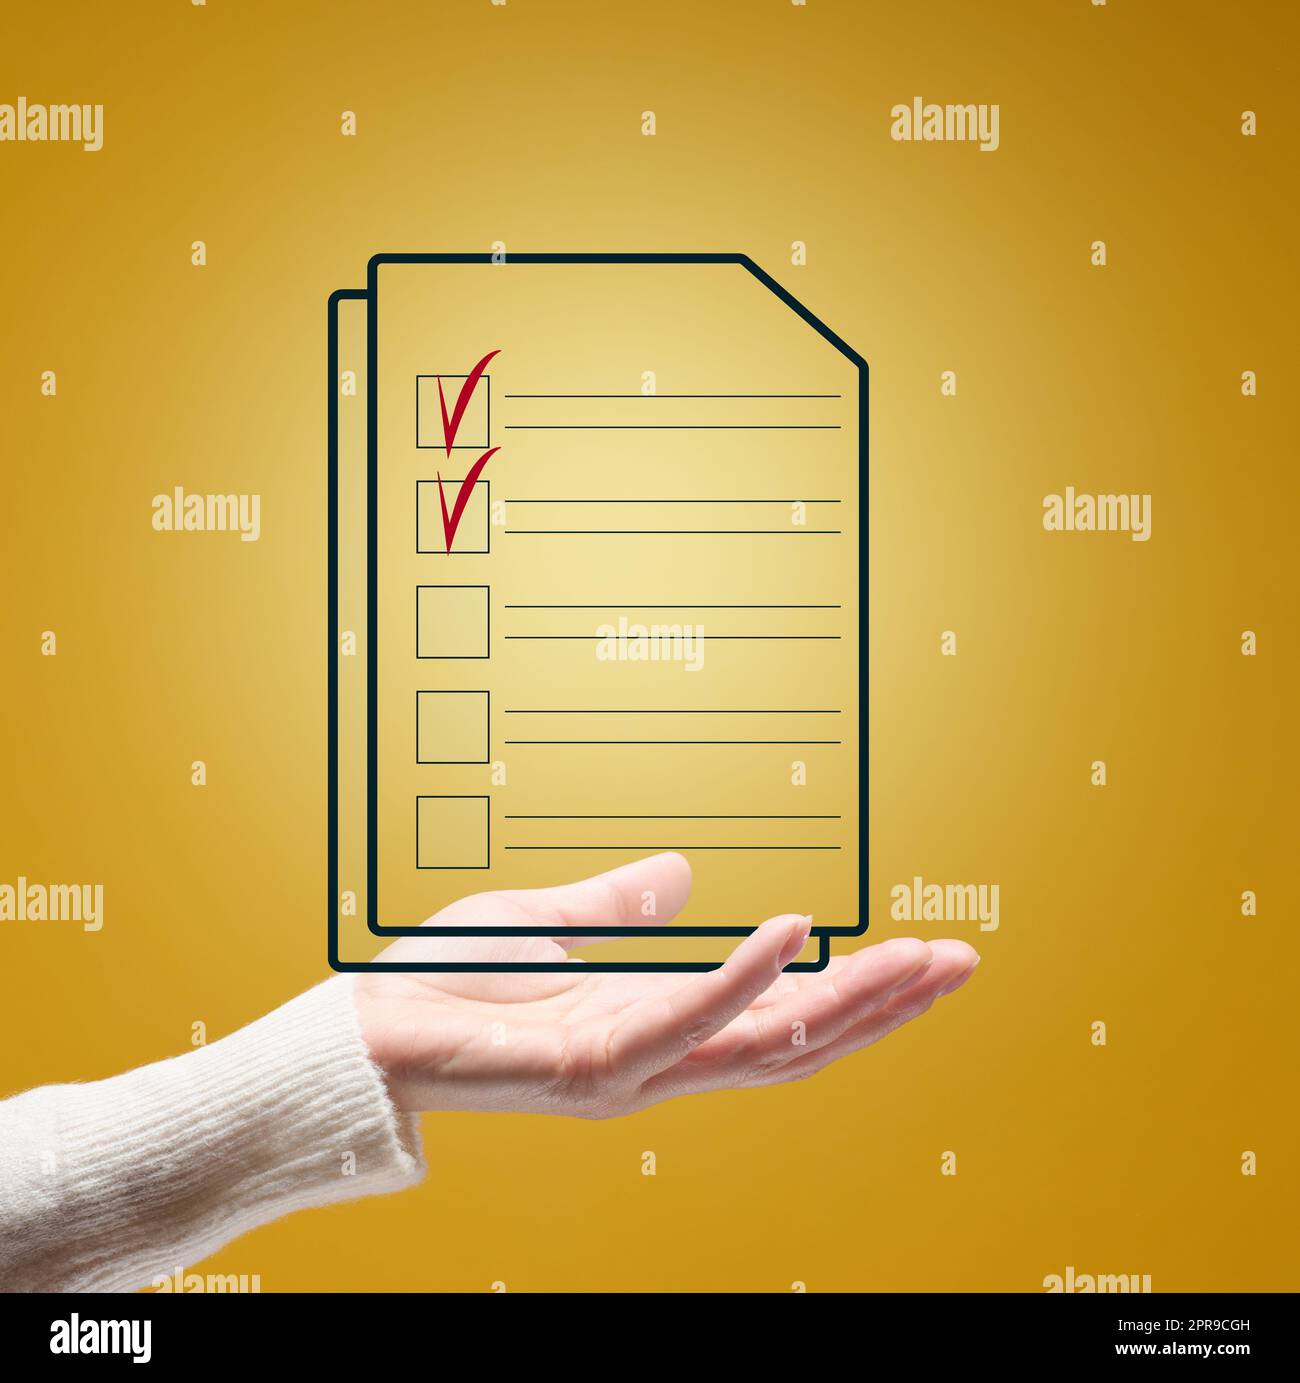 Female hand and document with check boxes on a yellow background. The concept of verification and control of documents Stock Photo